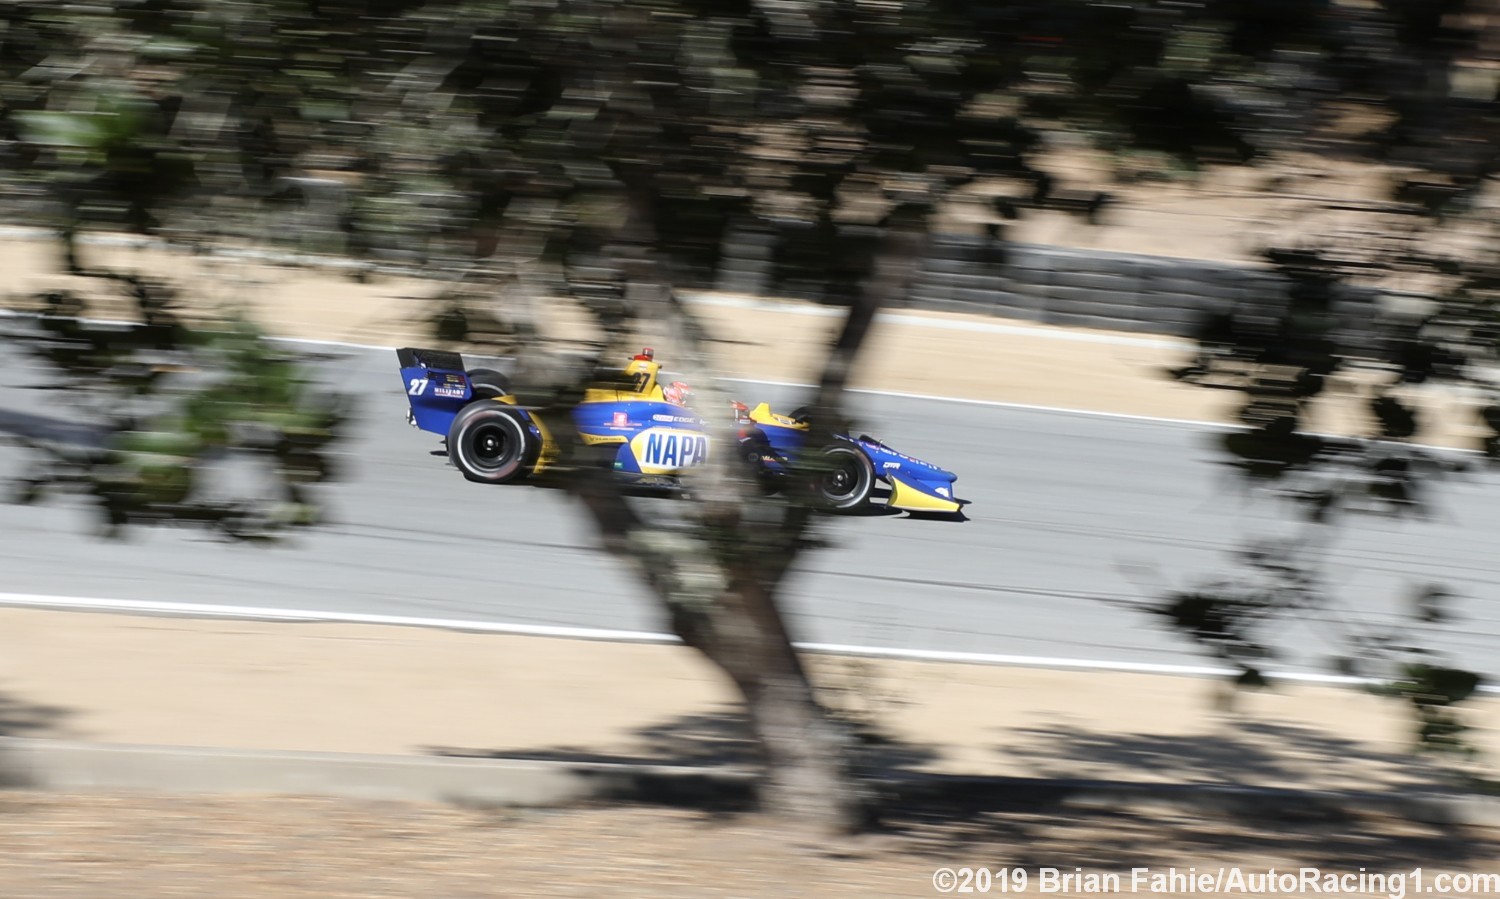 Rossi races out of the corkscrew